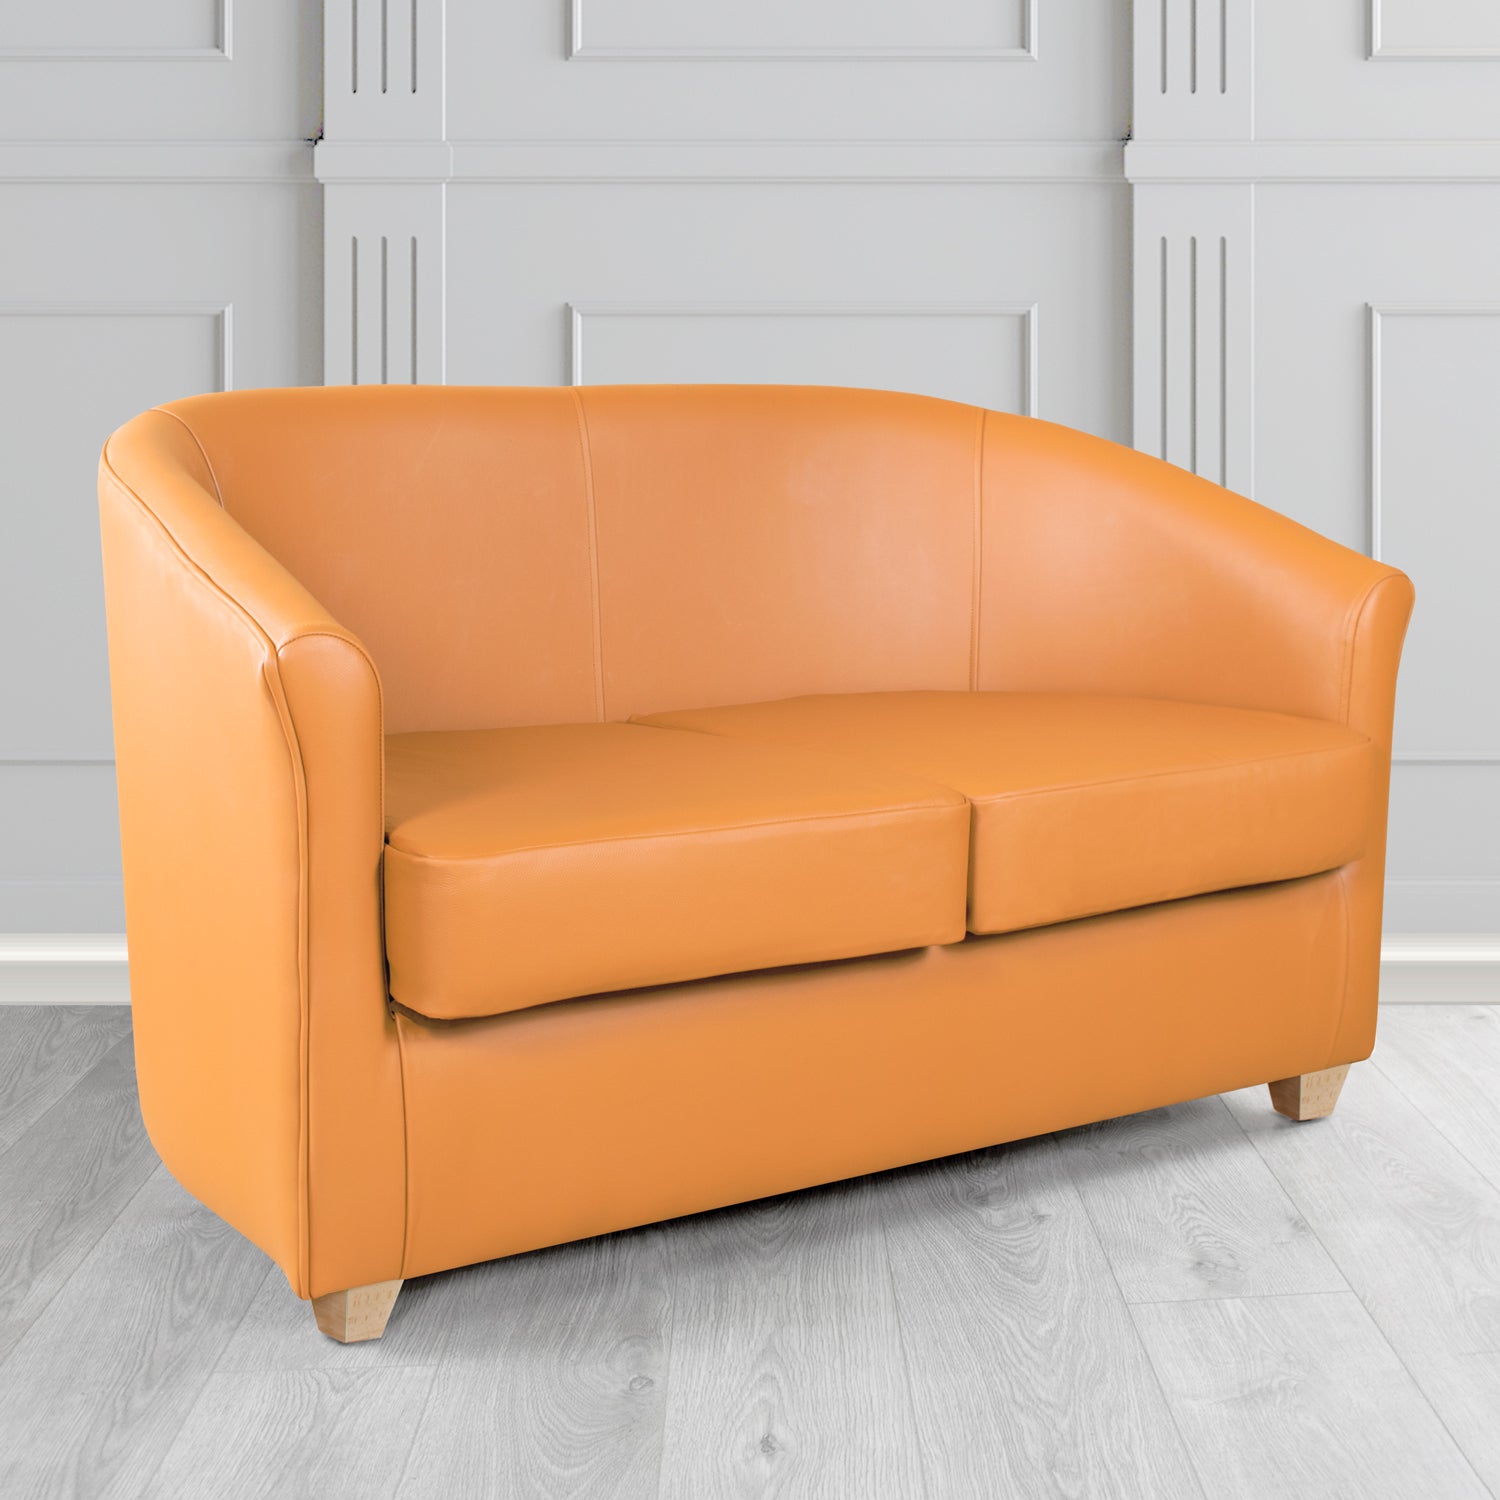 Cannes 2 Seater Tub Sofa in Just Colour Tangerine Crib 5 Faux Leather - The Tub Chair Shop